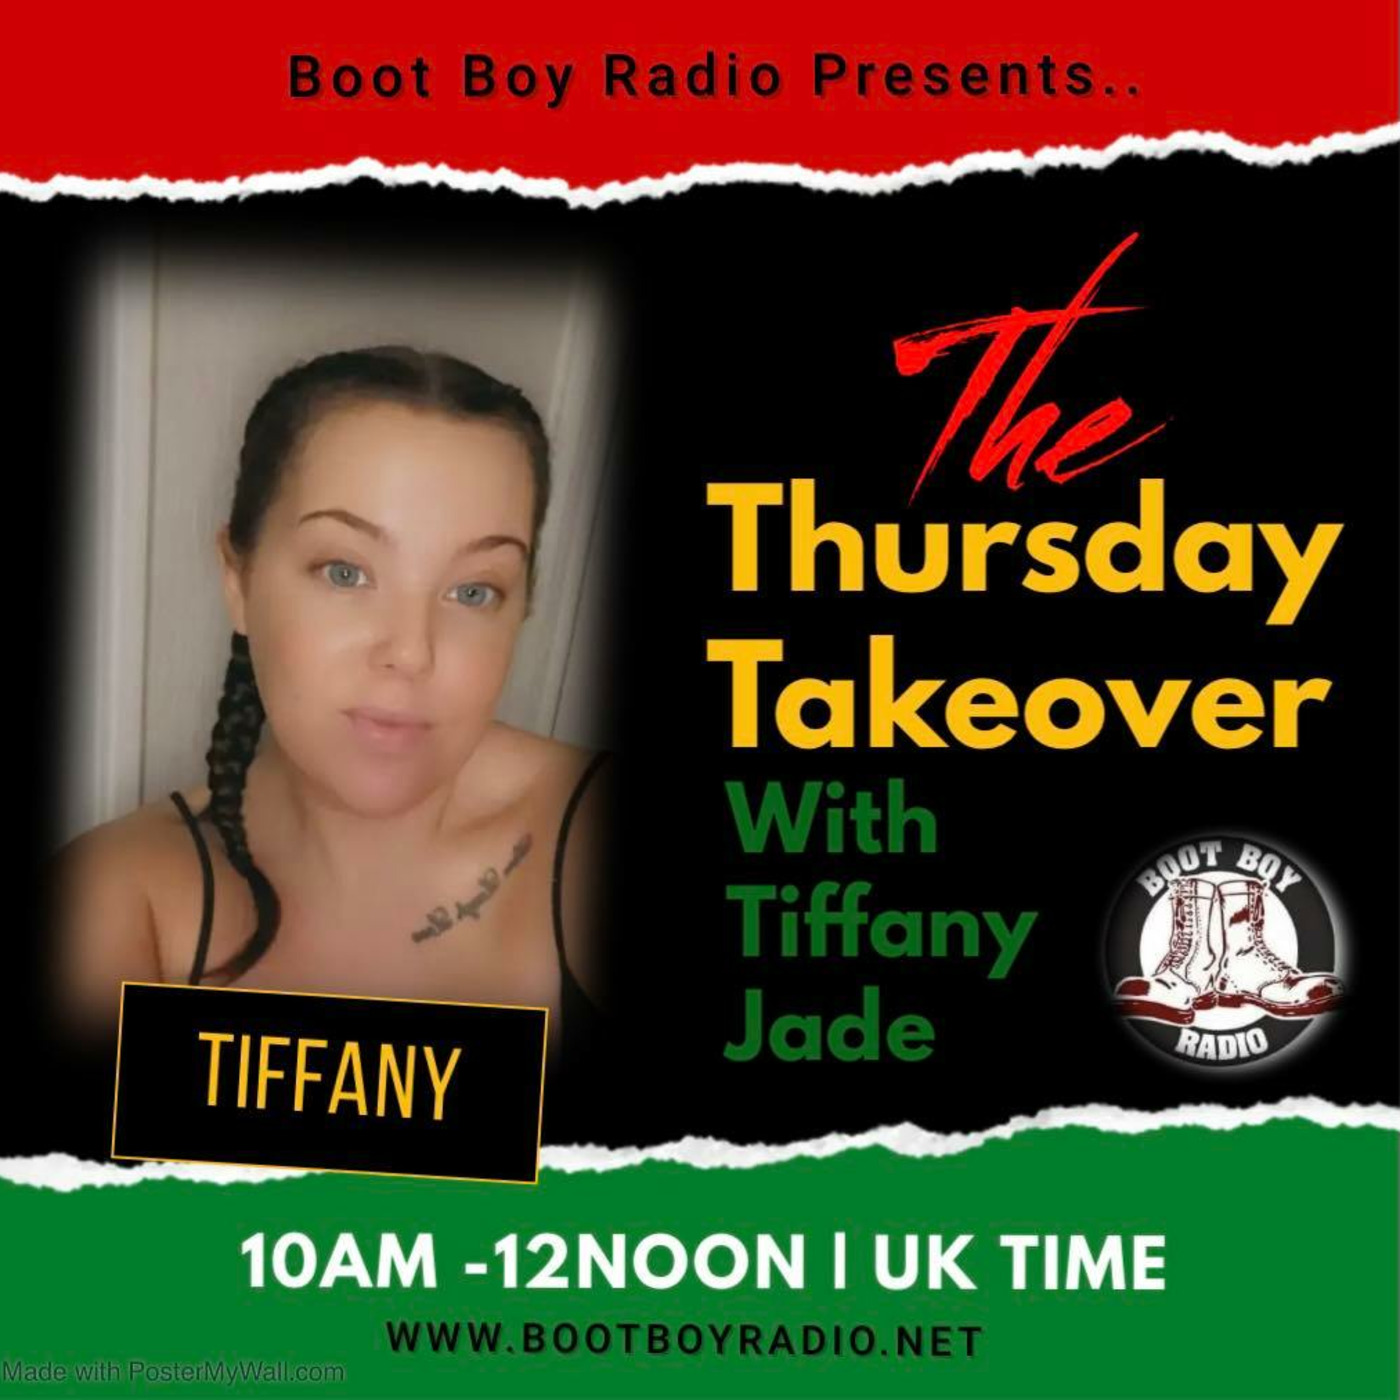 Episode 3082: Thursday Takeover With Tiffany Jade 19th Jan 2023 On www.bootboyradio.net